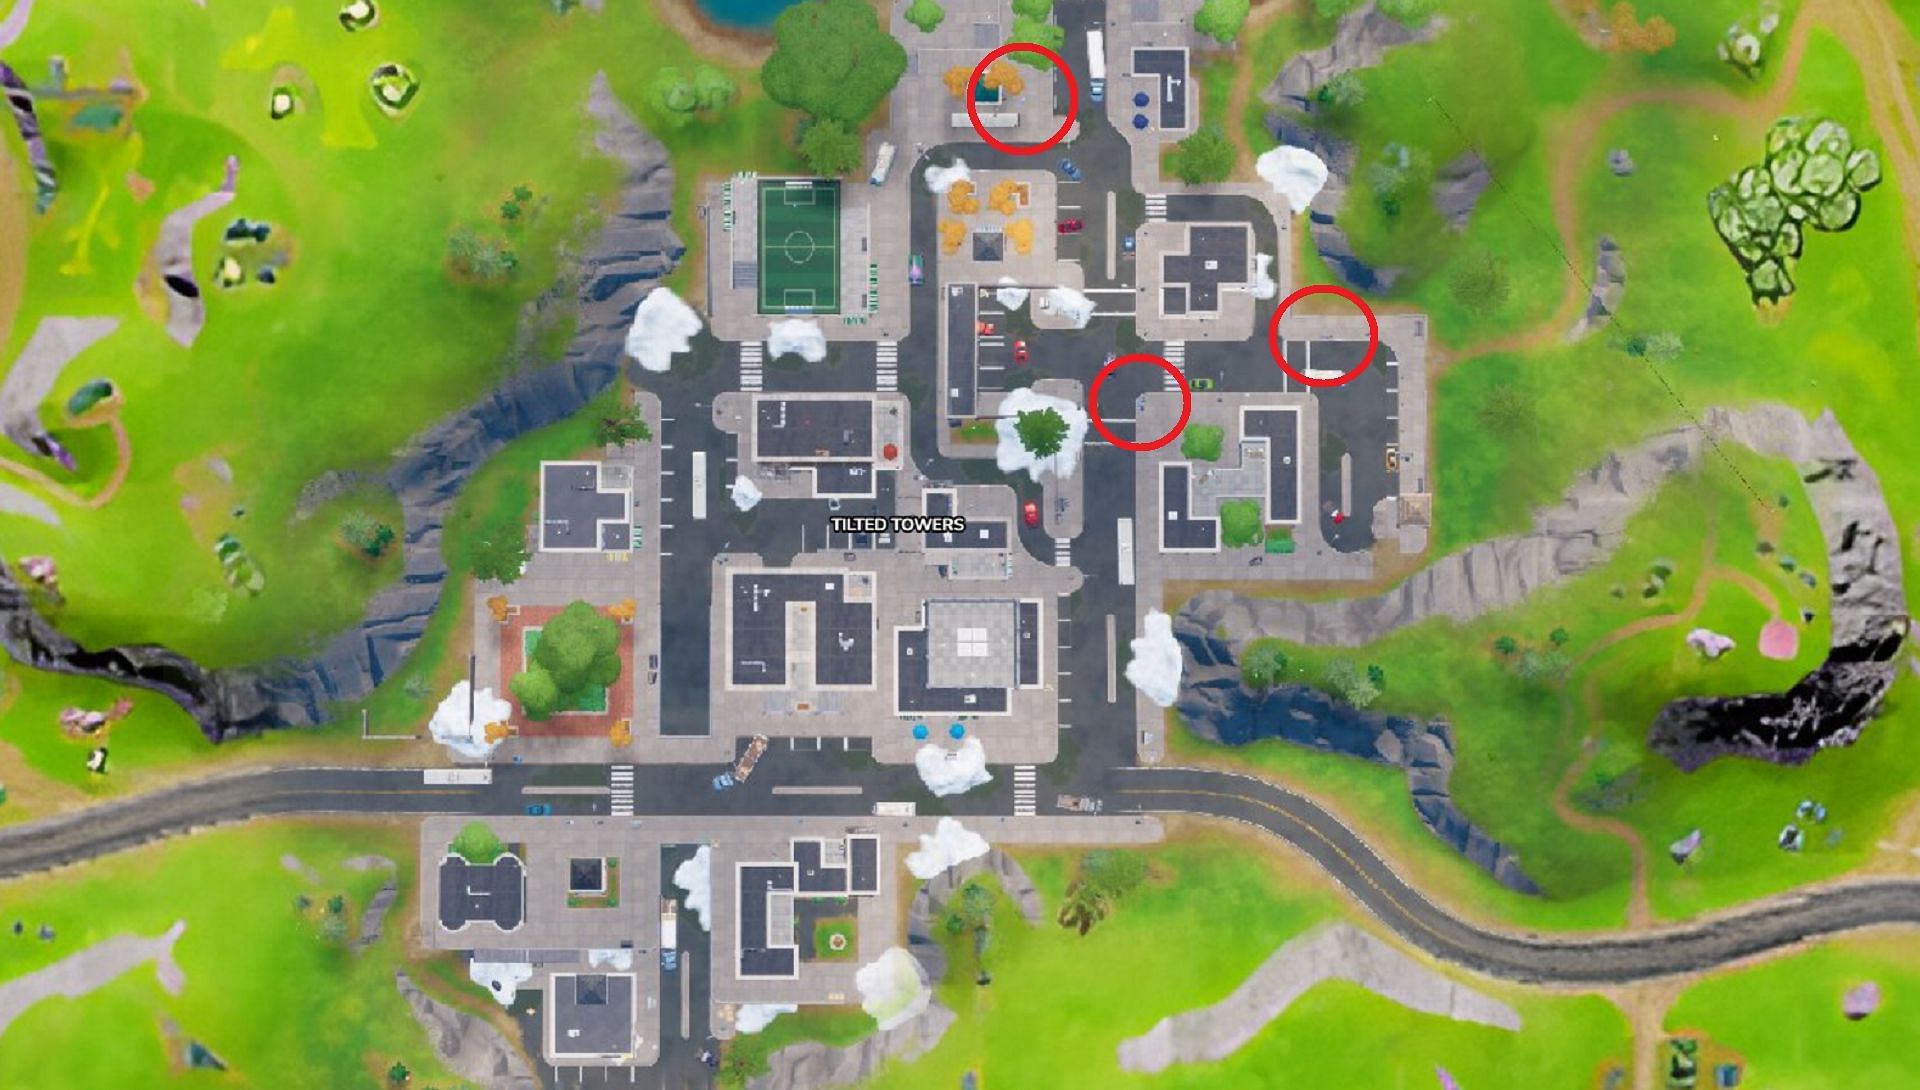 Mailbox locations in Tilted Towers in Chapter 3 Season 1 (Image via Fortnite.GG)